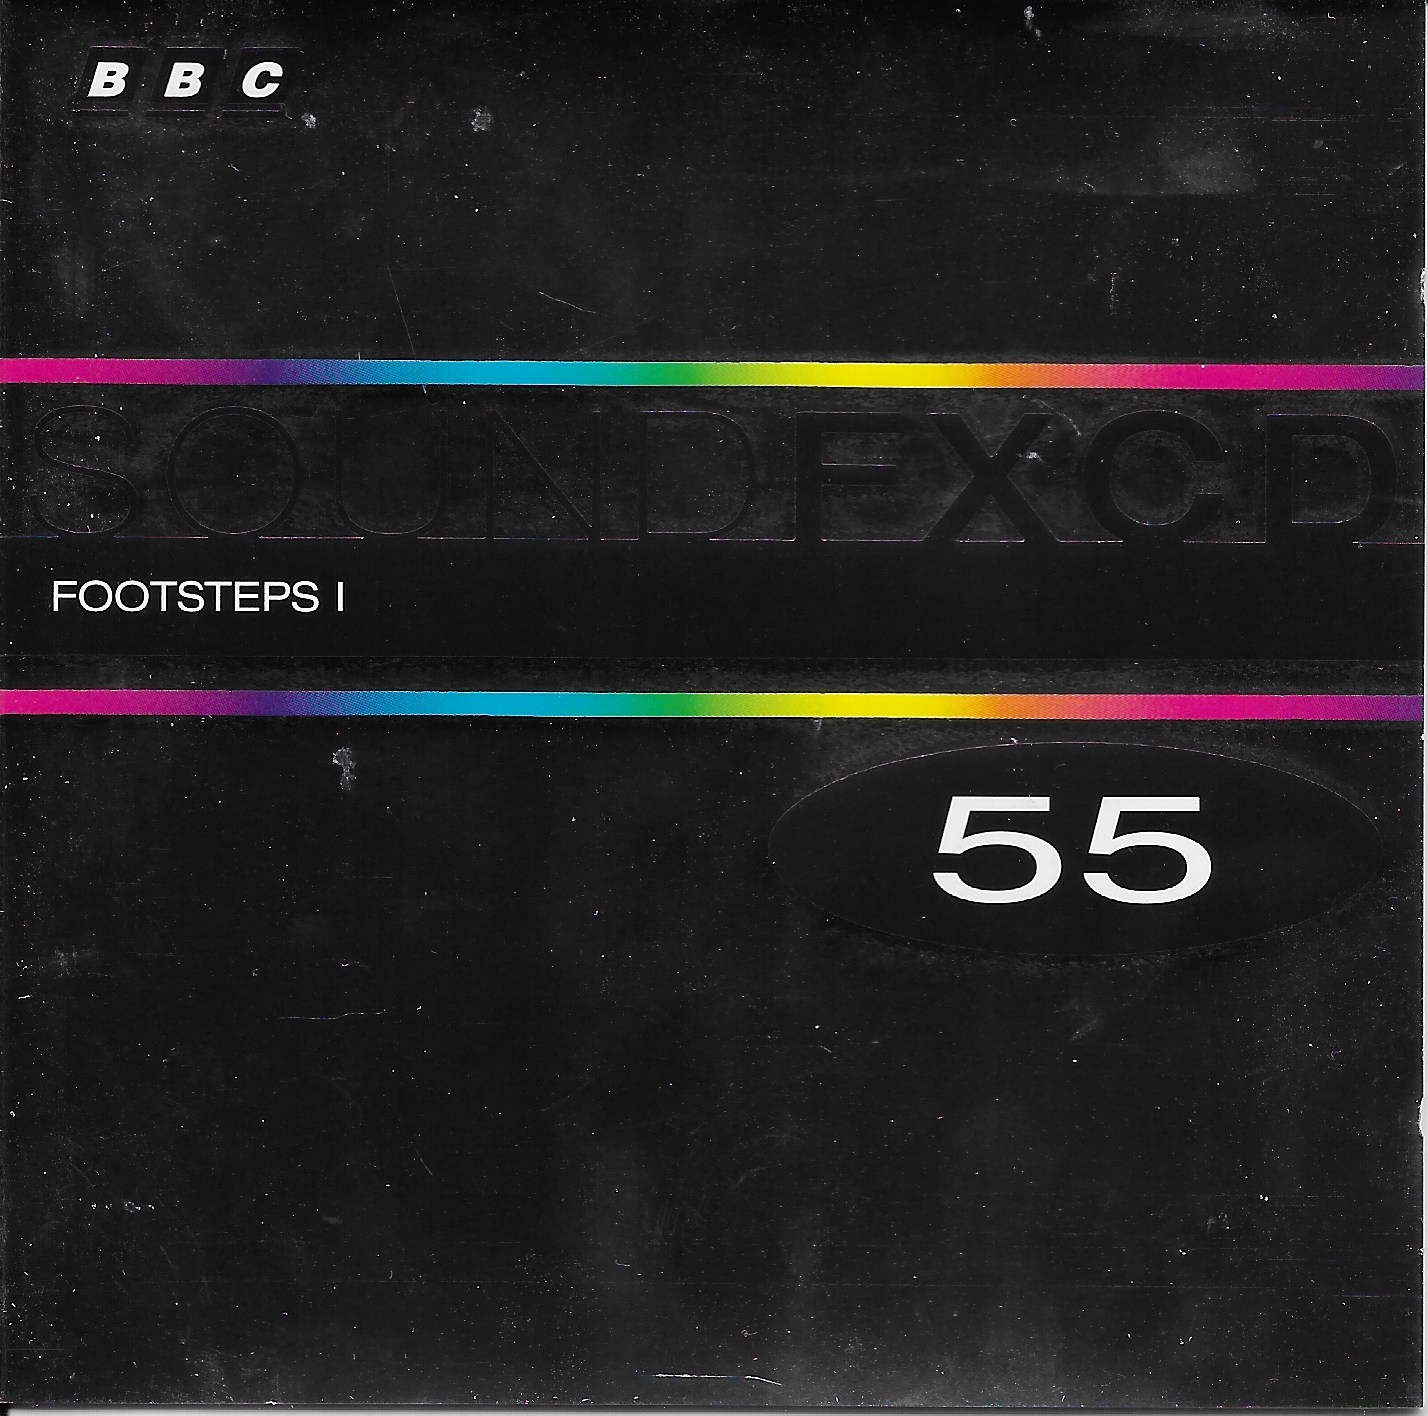 Picture of BBCCD SFX055 Footsteps I by artist Various from the BBC cds - Records and Tapes library